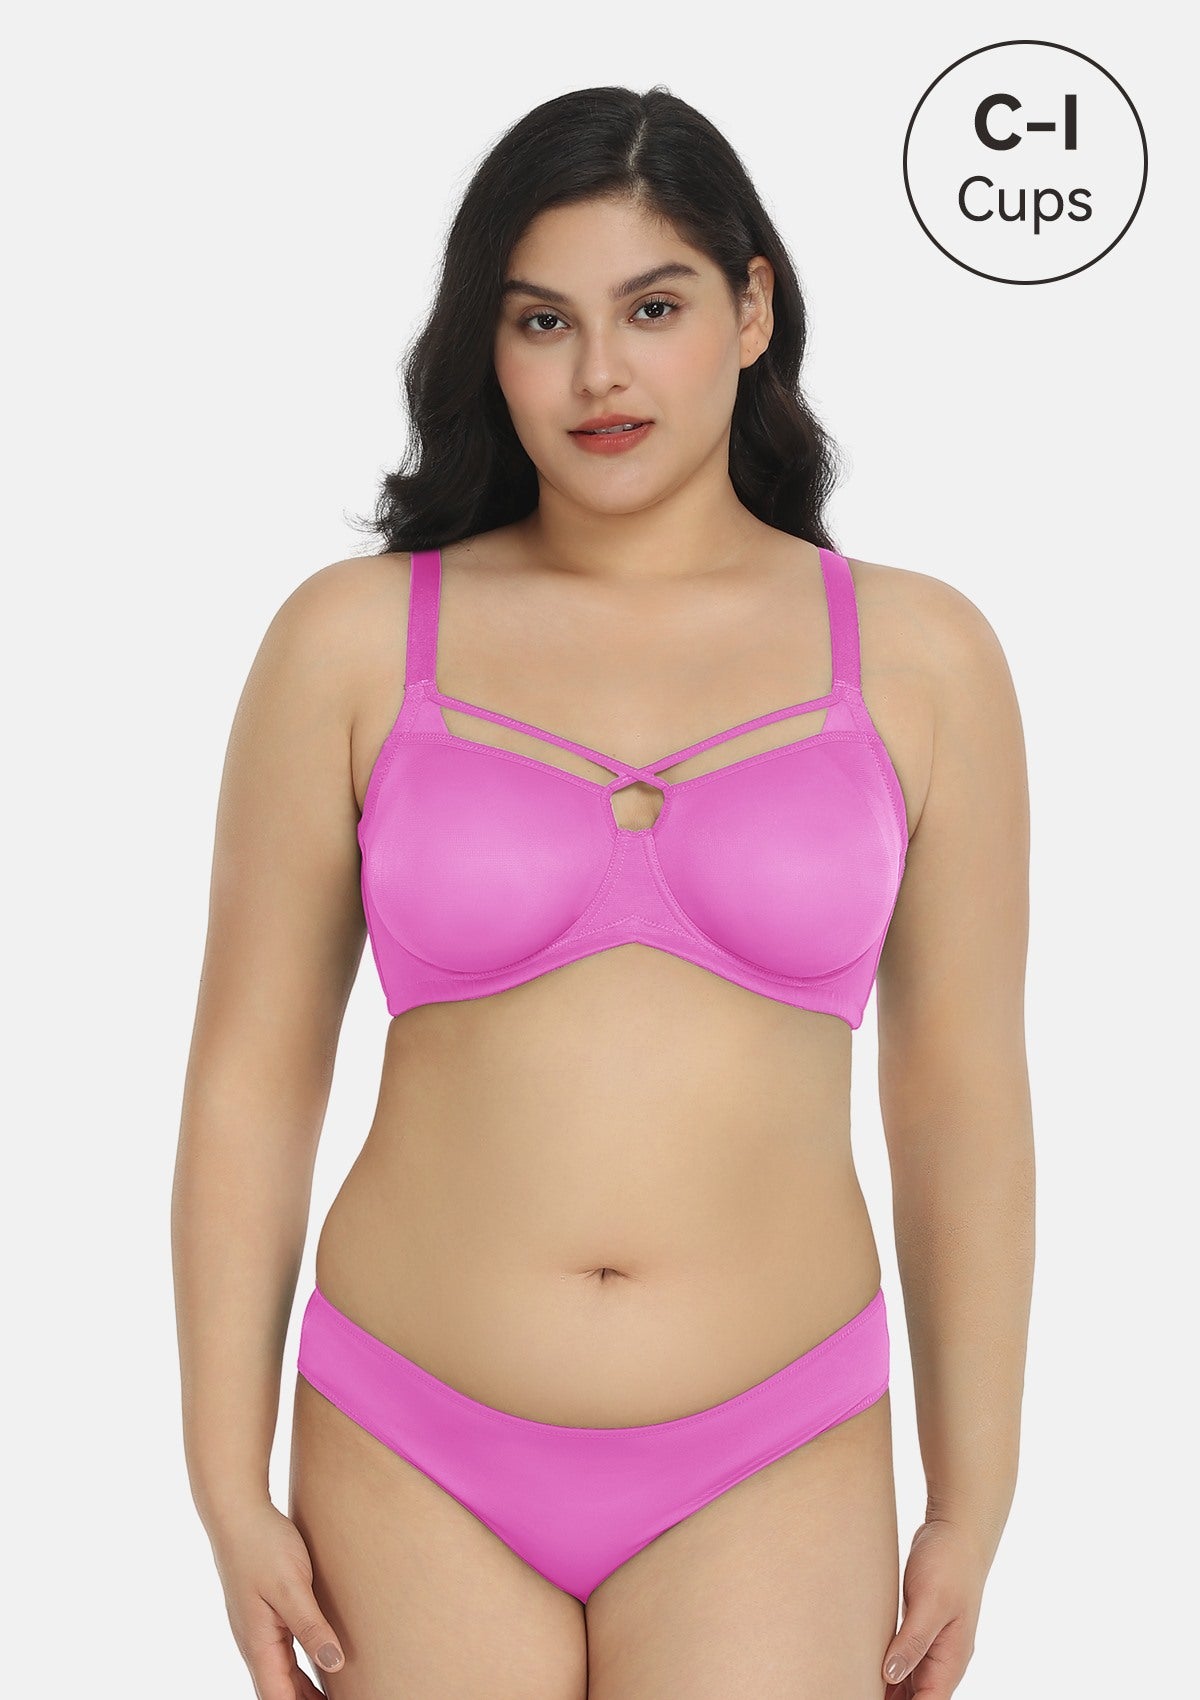 HSIA Billie Cross Front Strap Smooth Sheer Mesh Comfy Underwire Bra - Barbie Pink / 38 / DD/E